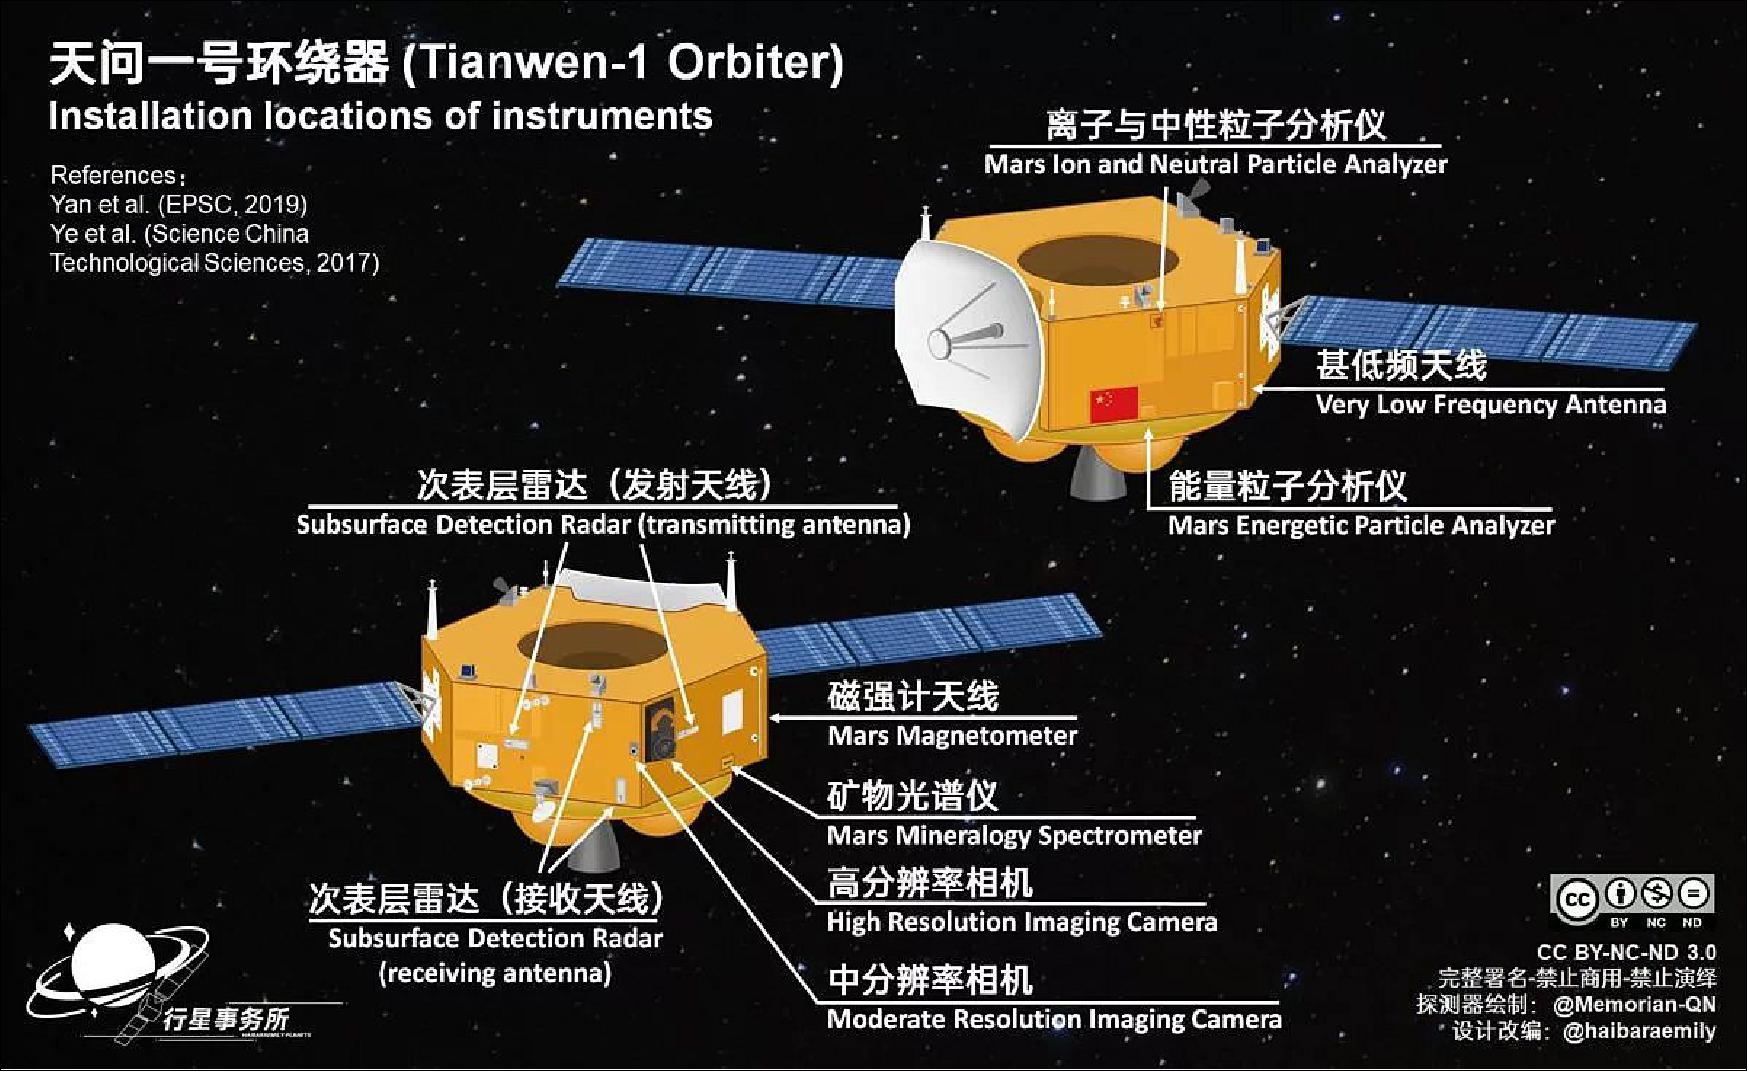 Figure 3: This infographic shows the location of instruments aboard China's Tianwen-1 orbiter (image credit: Andrew Jones, Ref. 6)